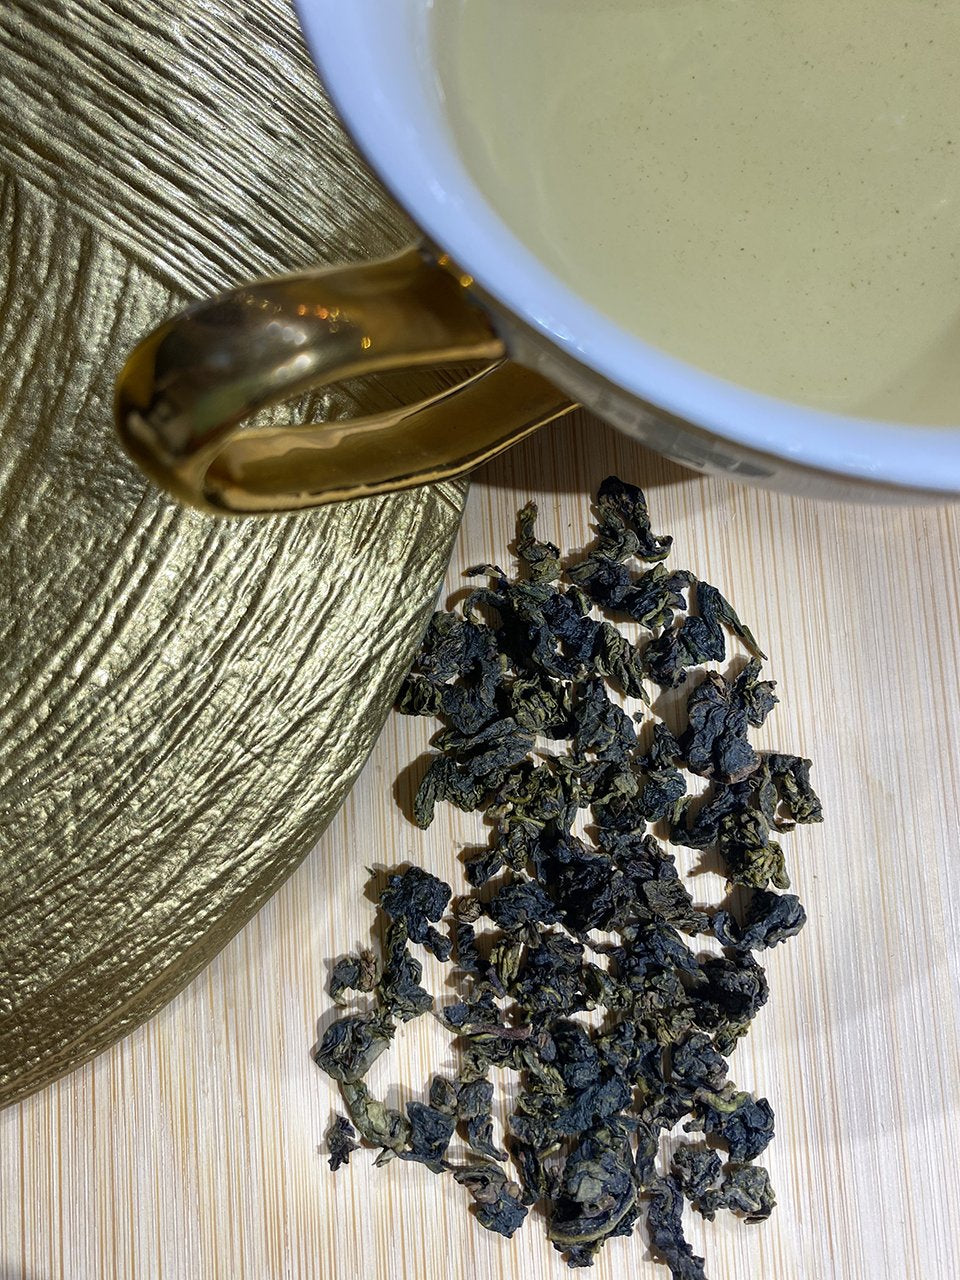 Quangzhou milk oolong - Perfectly oxidized Chinese tea